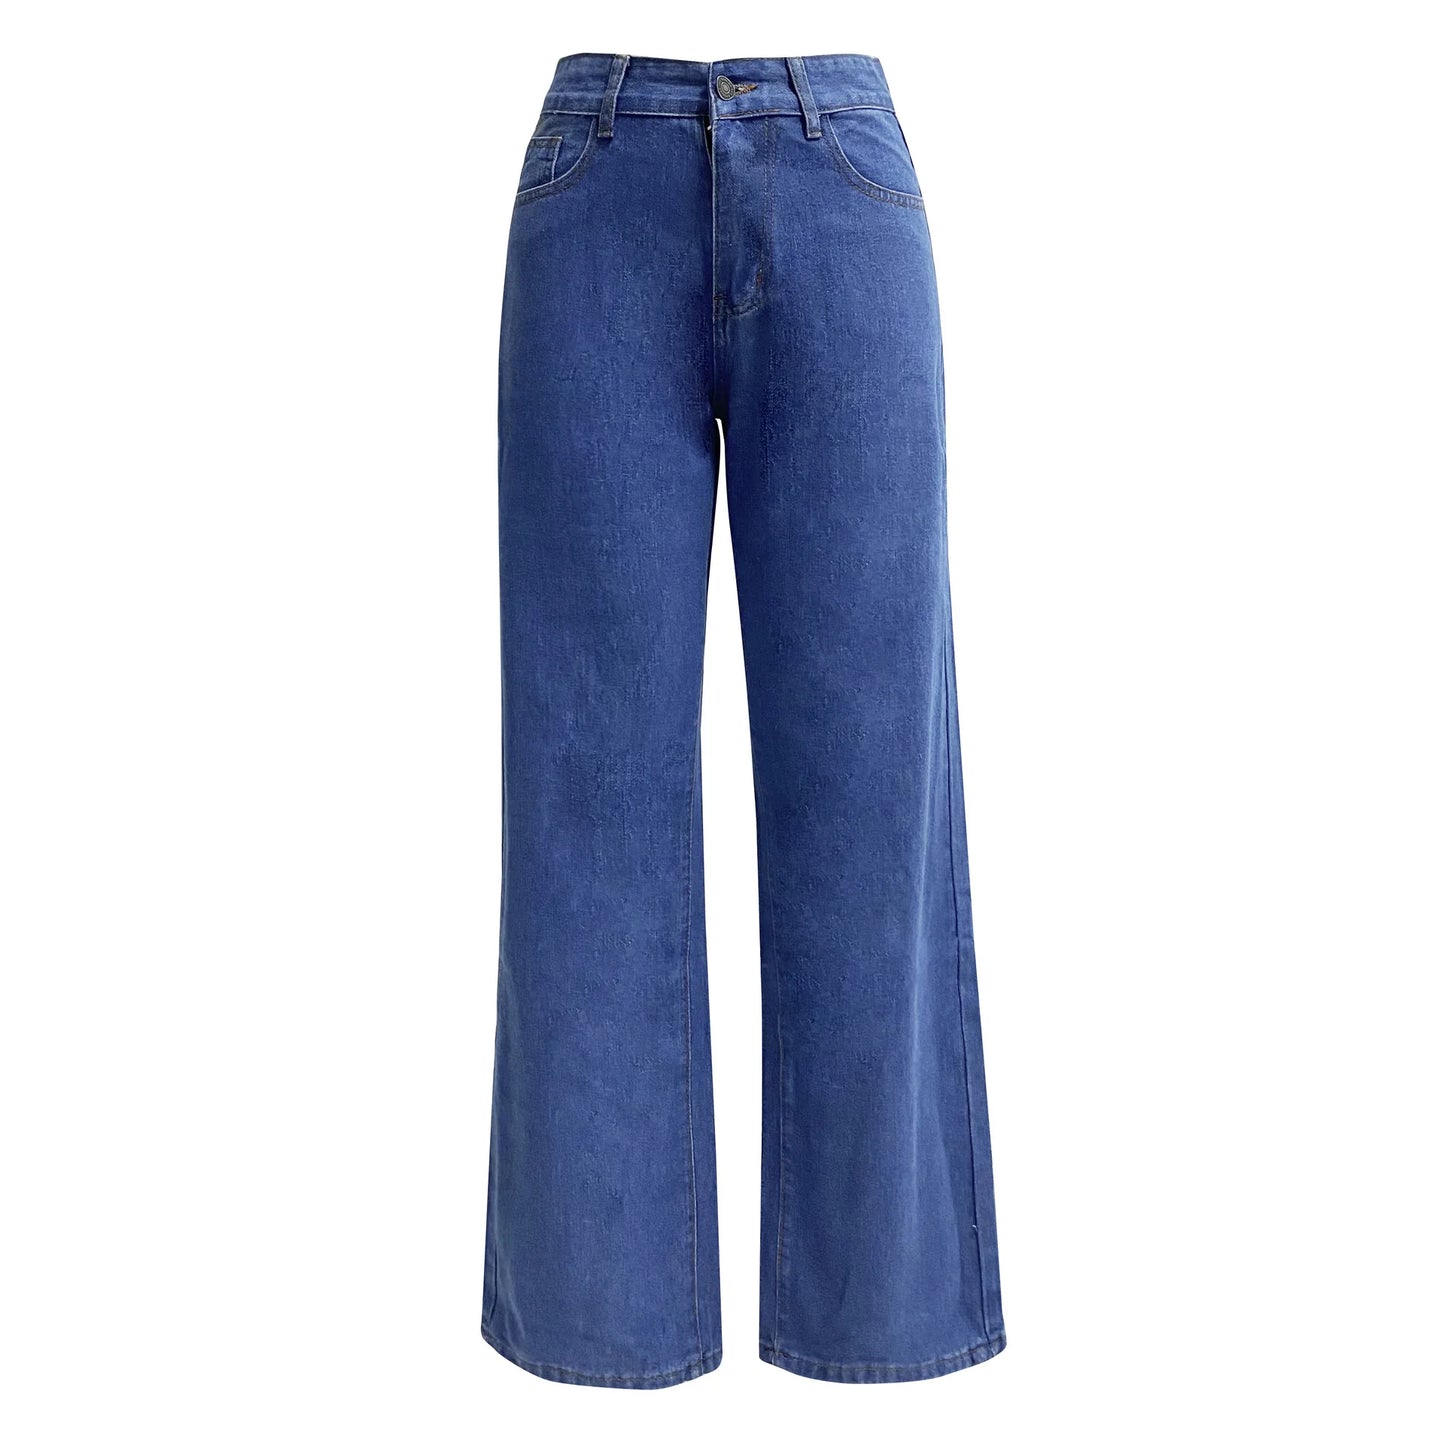 Retro Style High Waist Straight Leg Jeans in 3 Colors